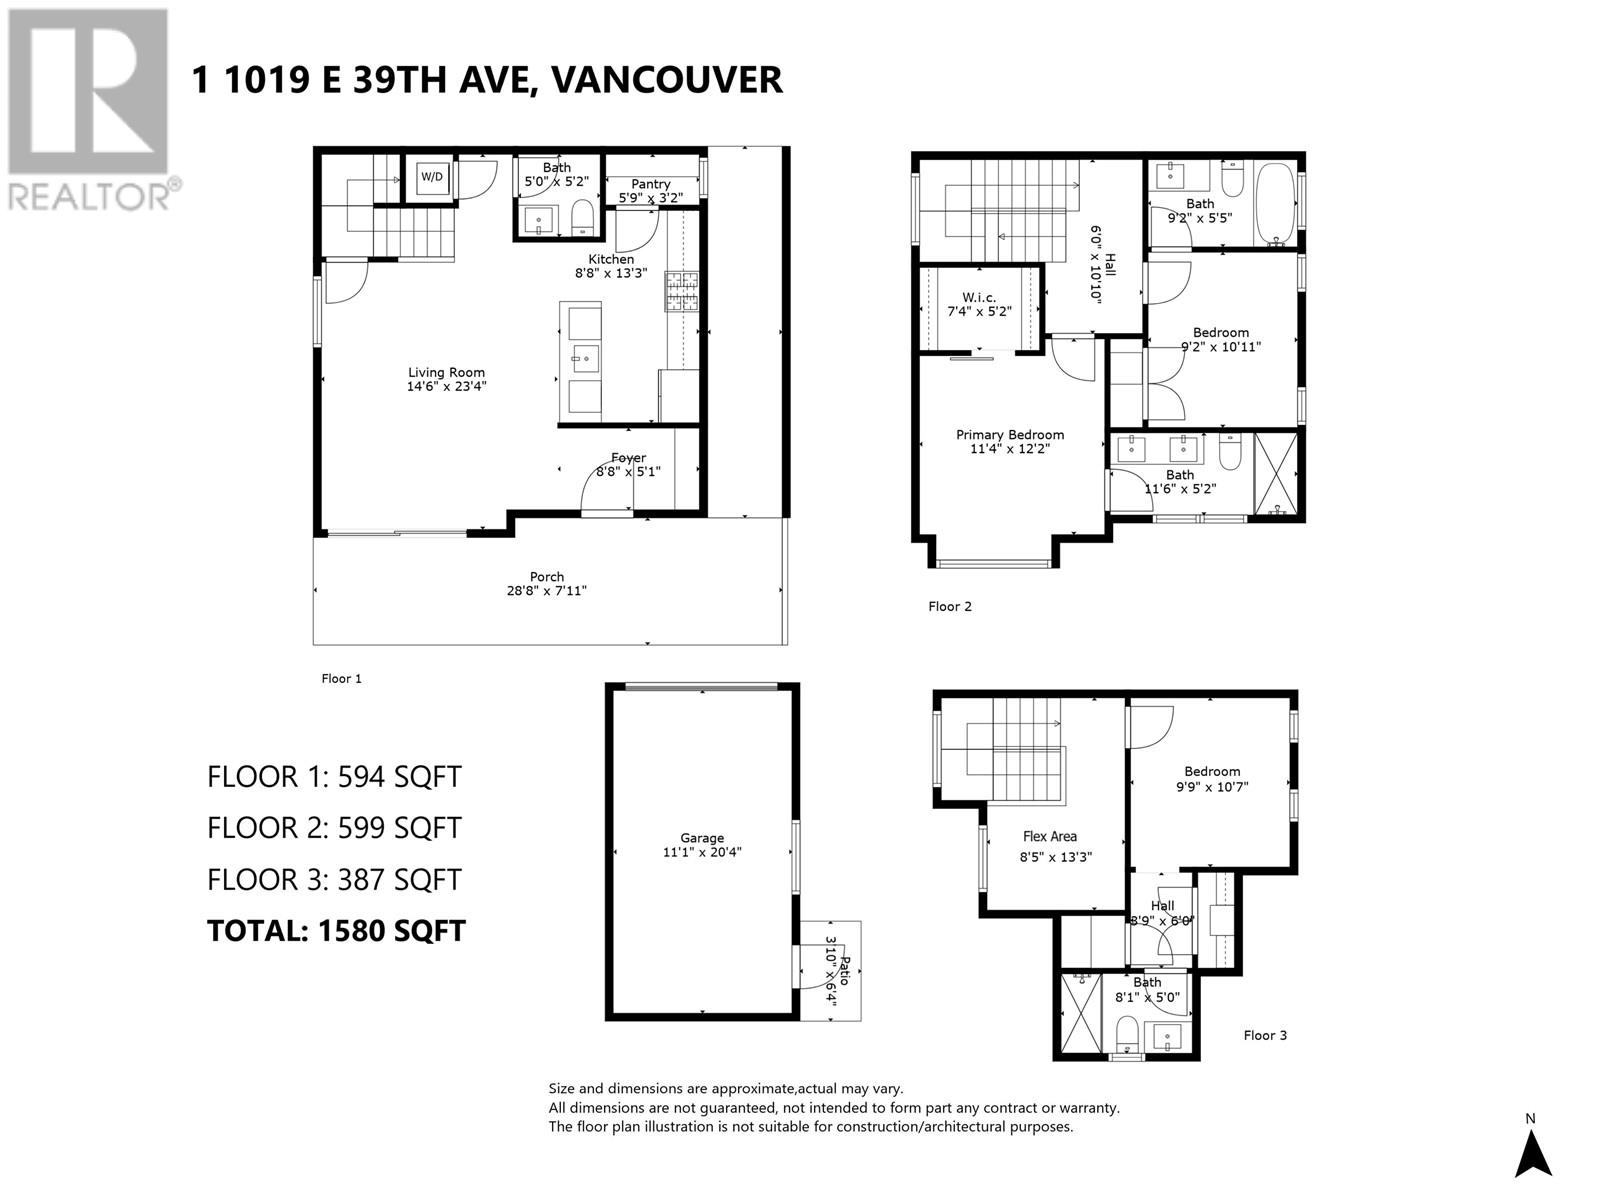 Listing Picture 33 of 33 : 1 1019 39TH AVENUE, Vancouver / 溫哥華 - 魯藝地產 Yvonne Lu Group - MLS Medallion Club Member